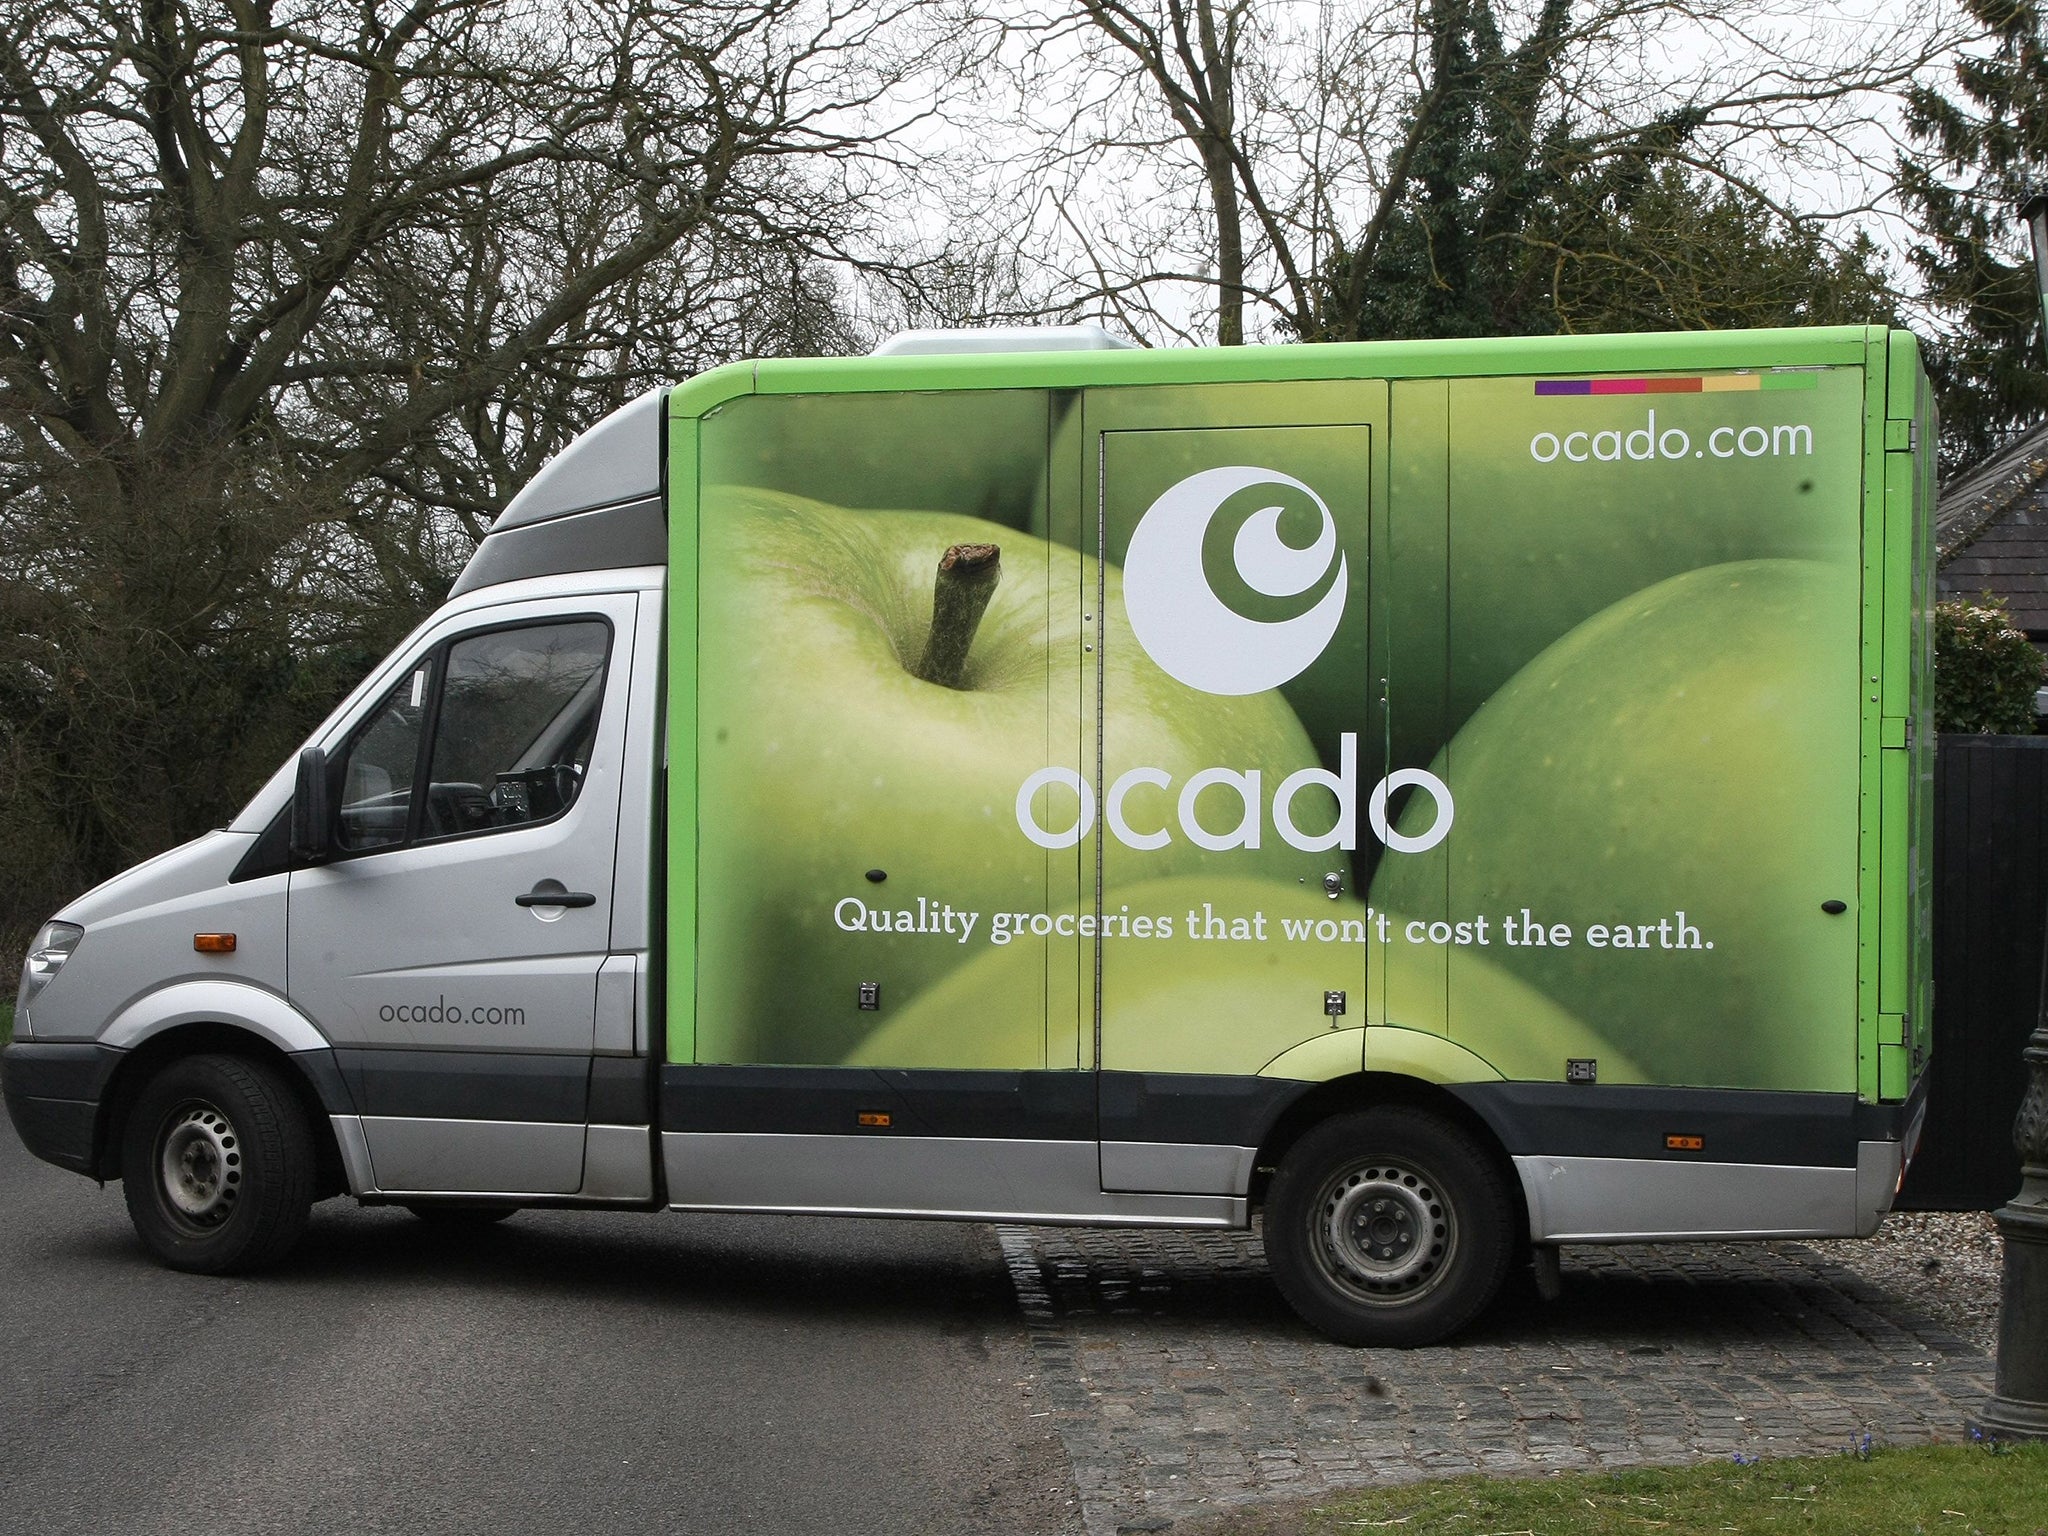 Any partnership would be a welcome relief for Ocado, which has not yet found an overseas partner for a licensing deal